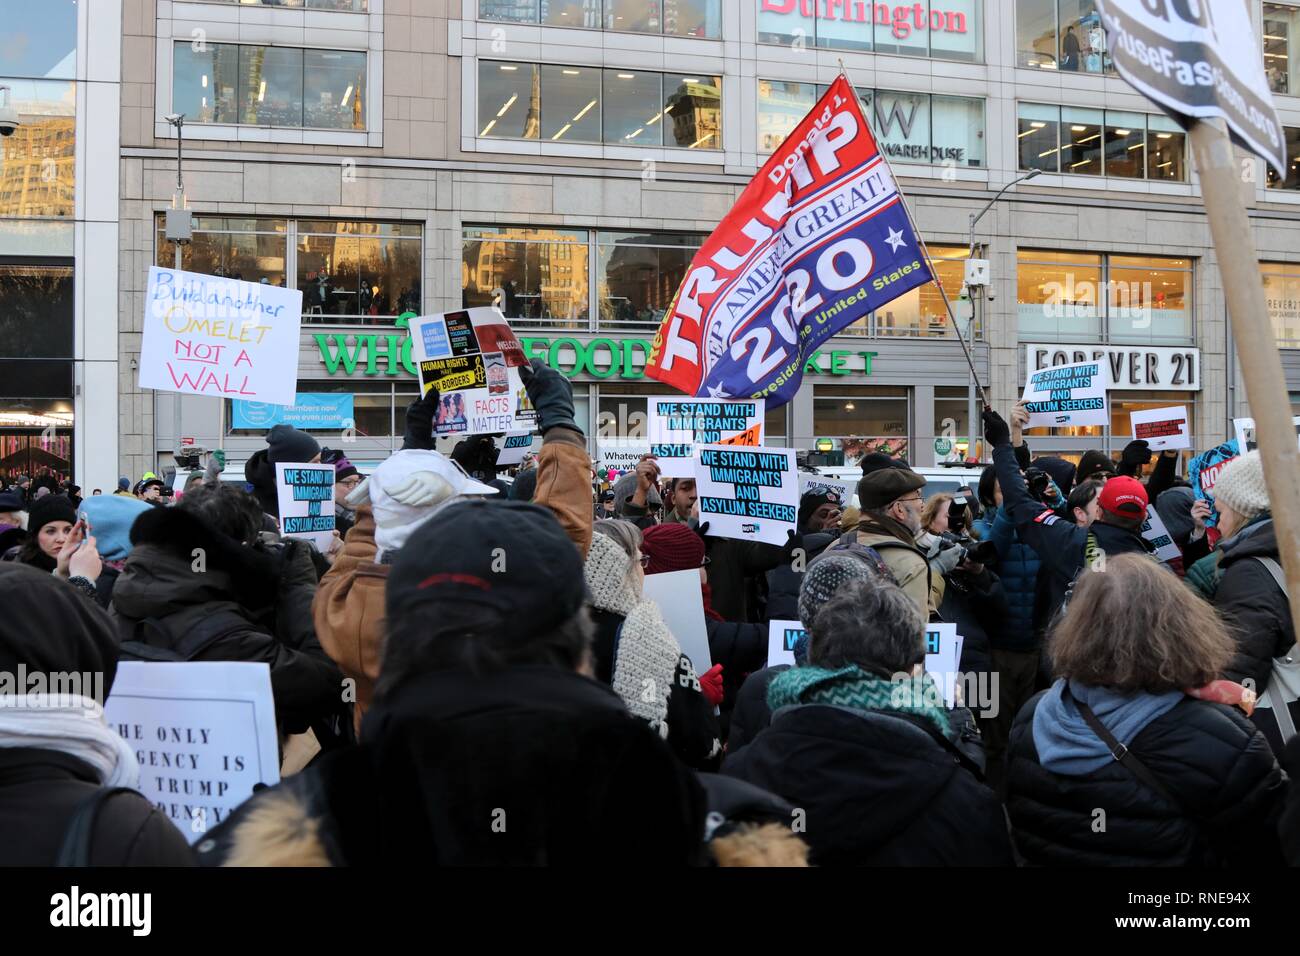 New York, NY, USA.  18th Feb, 2019. Large crowd rallied at Union Square on 18 February, 2019 in response to  Indivisible National call to action for nationwide protests against  U.S. President Donald Trump’s illegitimate use of emergency powers on President’s Day. Several other protests were held in other American cities on this national holiday celebration of past U.S. presidents.  © 2019 G. Ronald Lopez/DigiPixsAgain.us/Alamy Live News Stock Photo